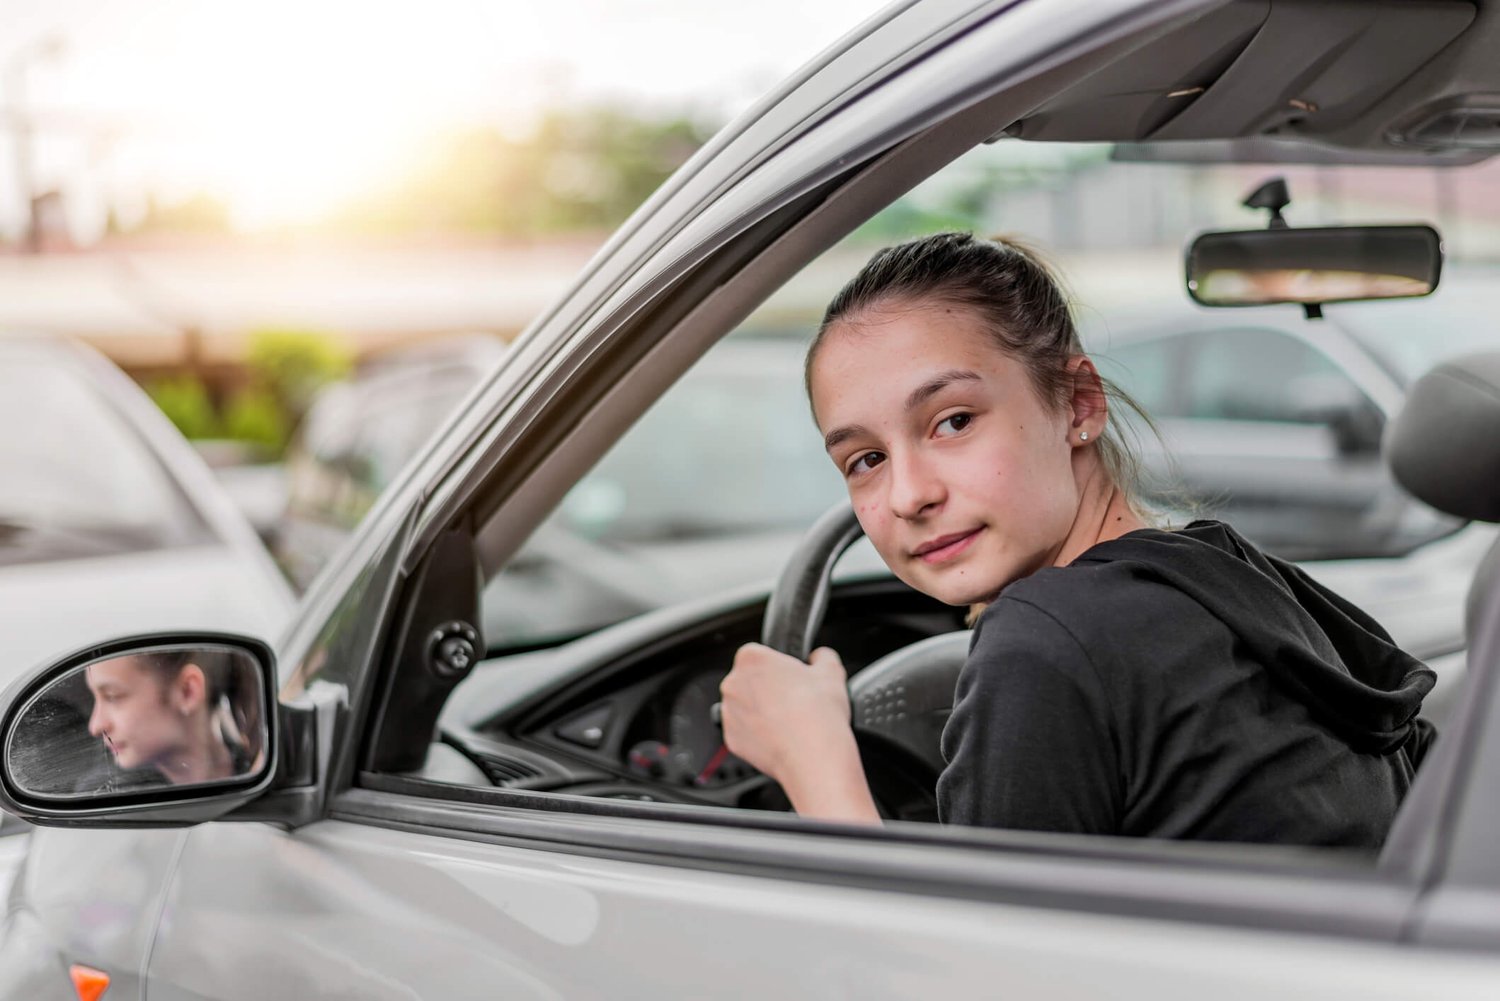 Survey: 1 in 4 Teens Too Scared to Drive